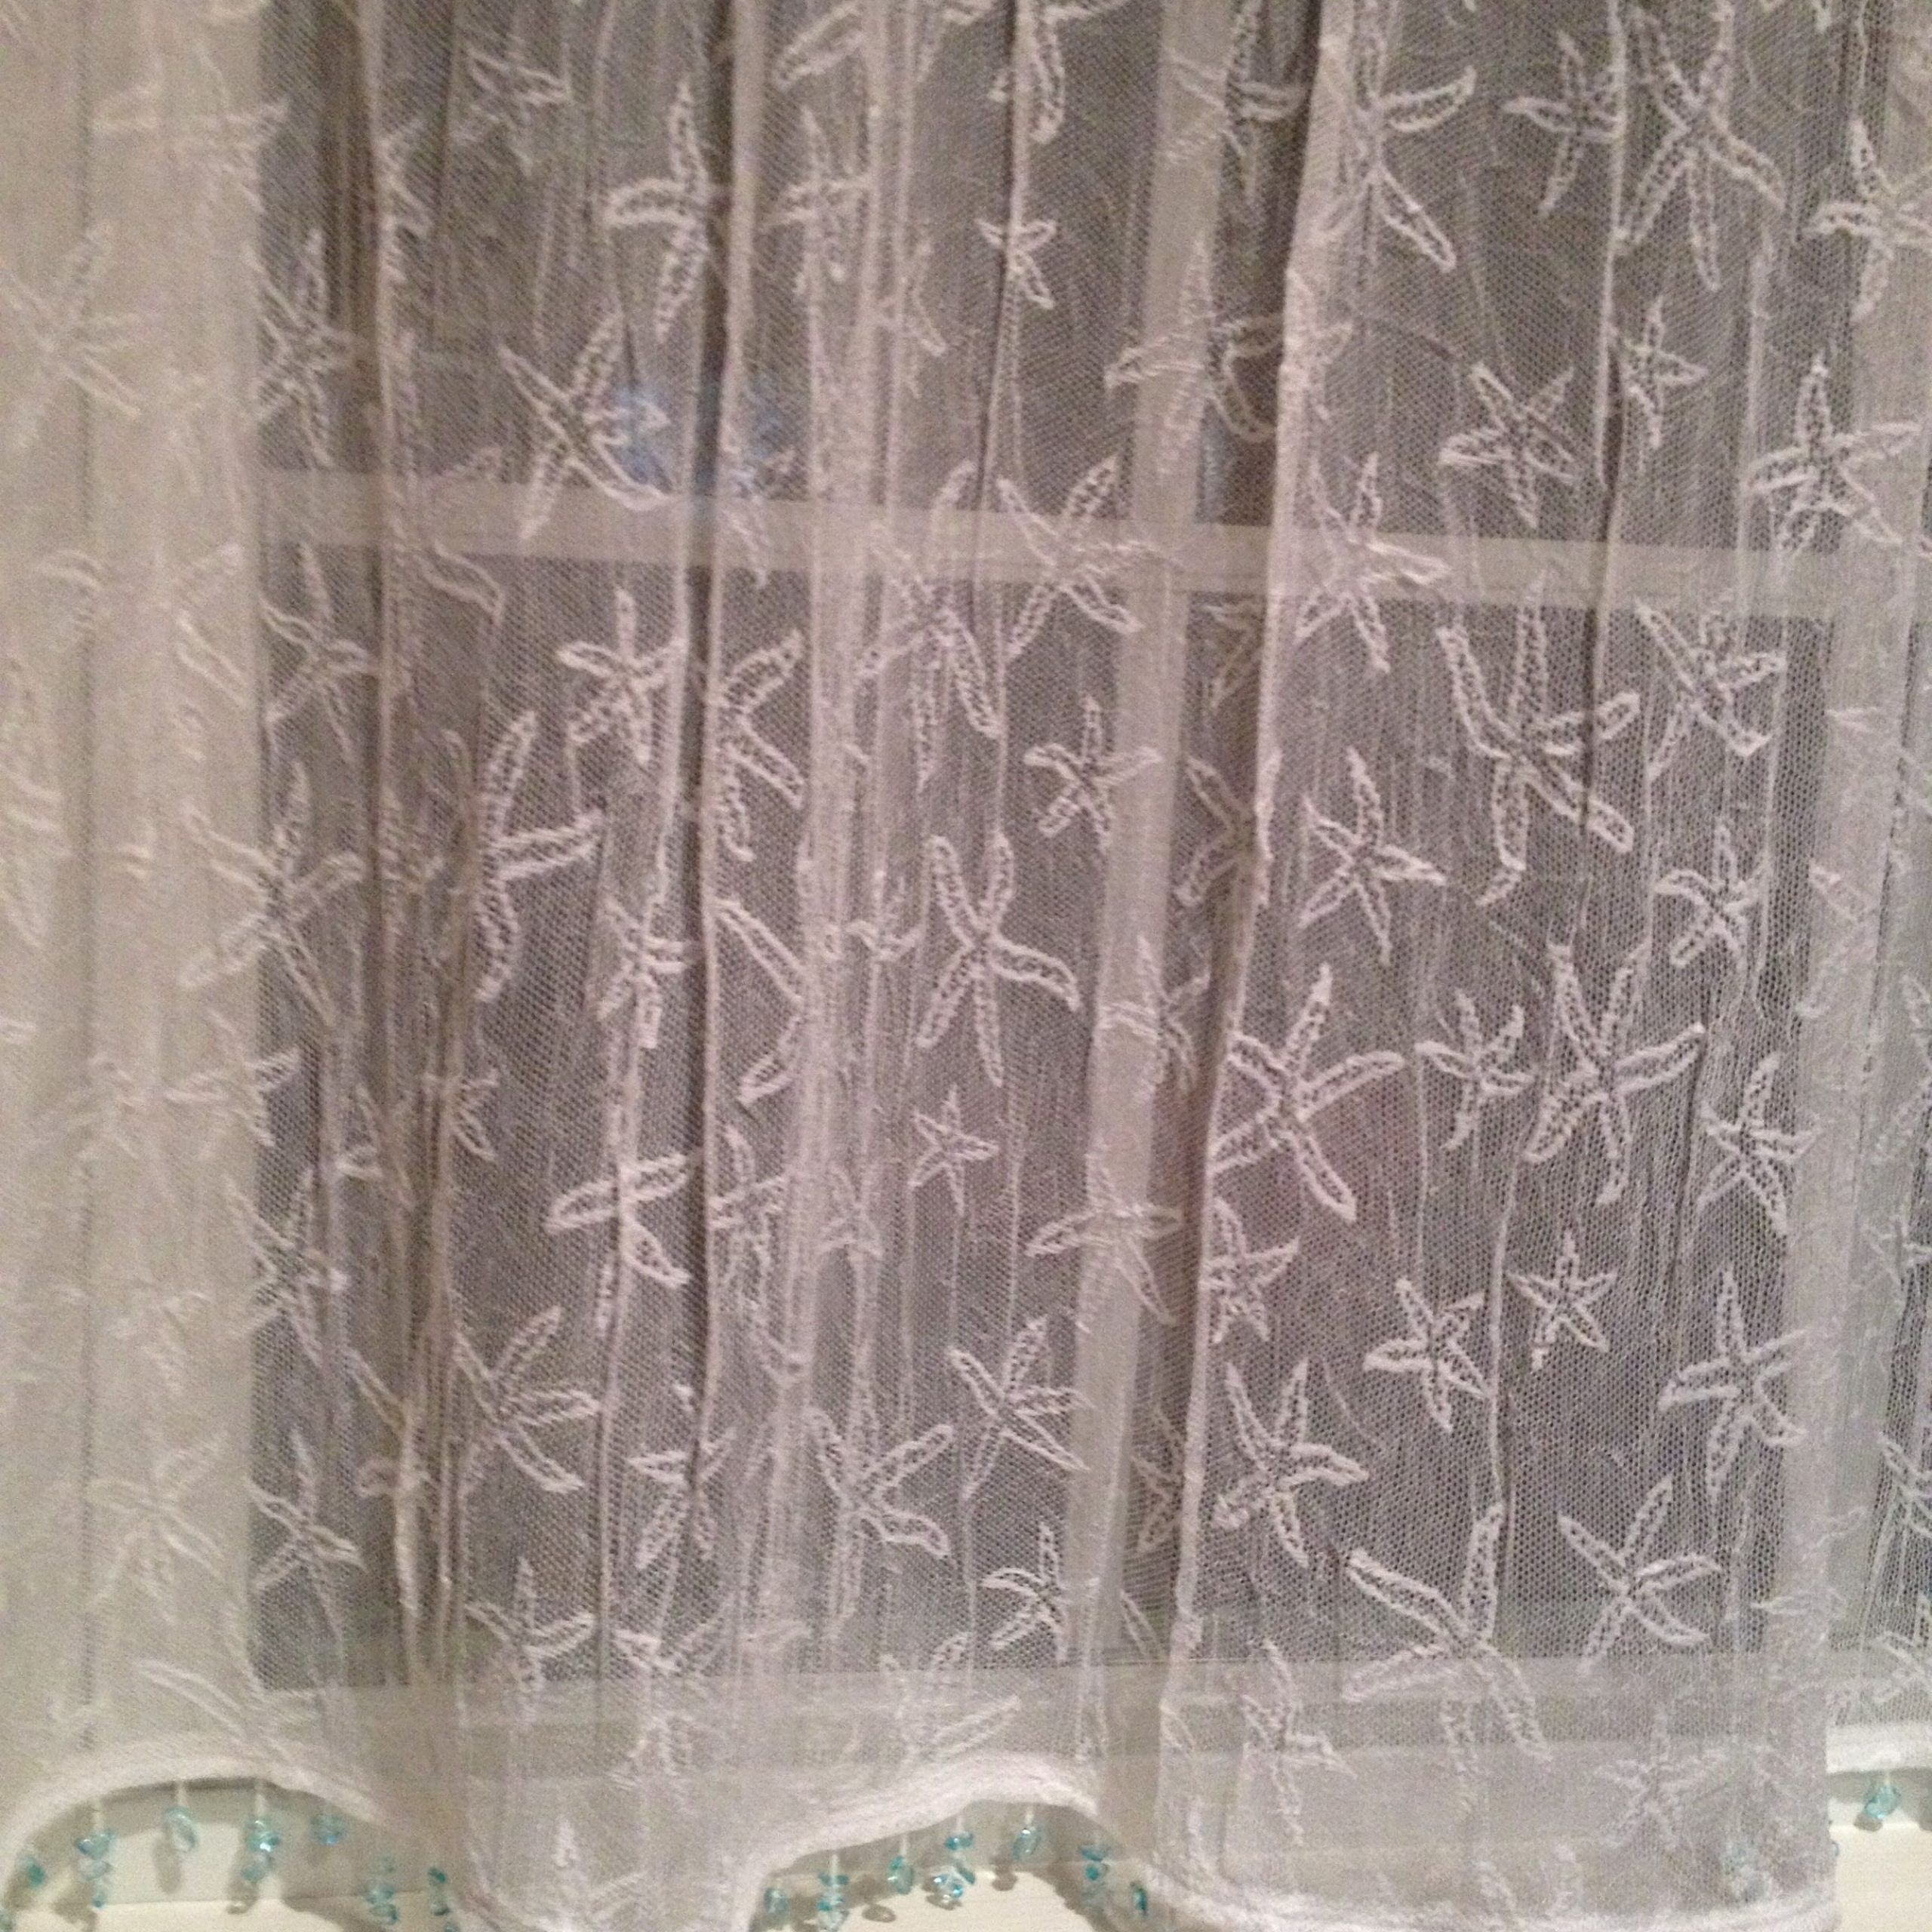 Coastal Starfish Curtains  Sheer With Aqua Sea Glass Bead Within Marine Life Motif Knitted Lace Window Curtain Pieces (View 7 of 20)